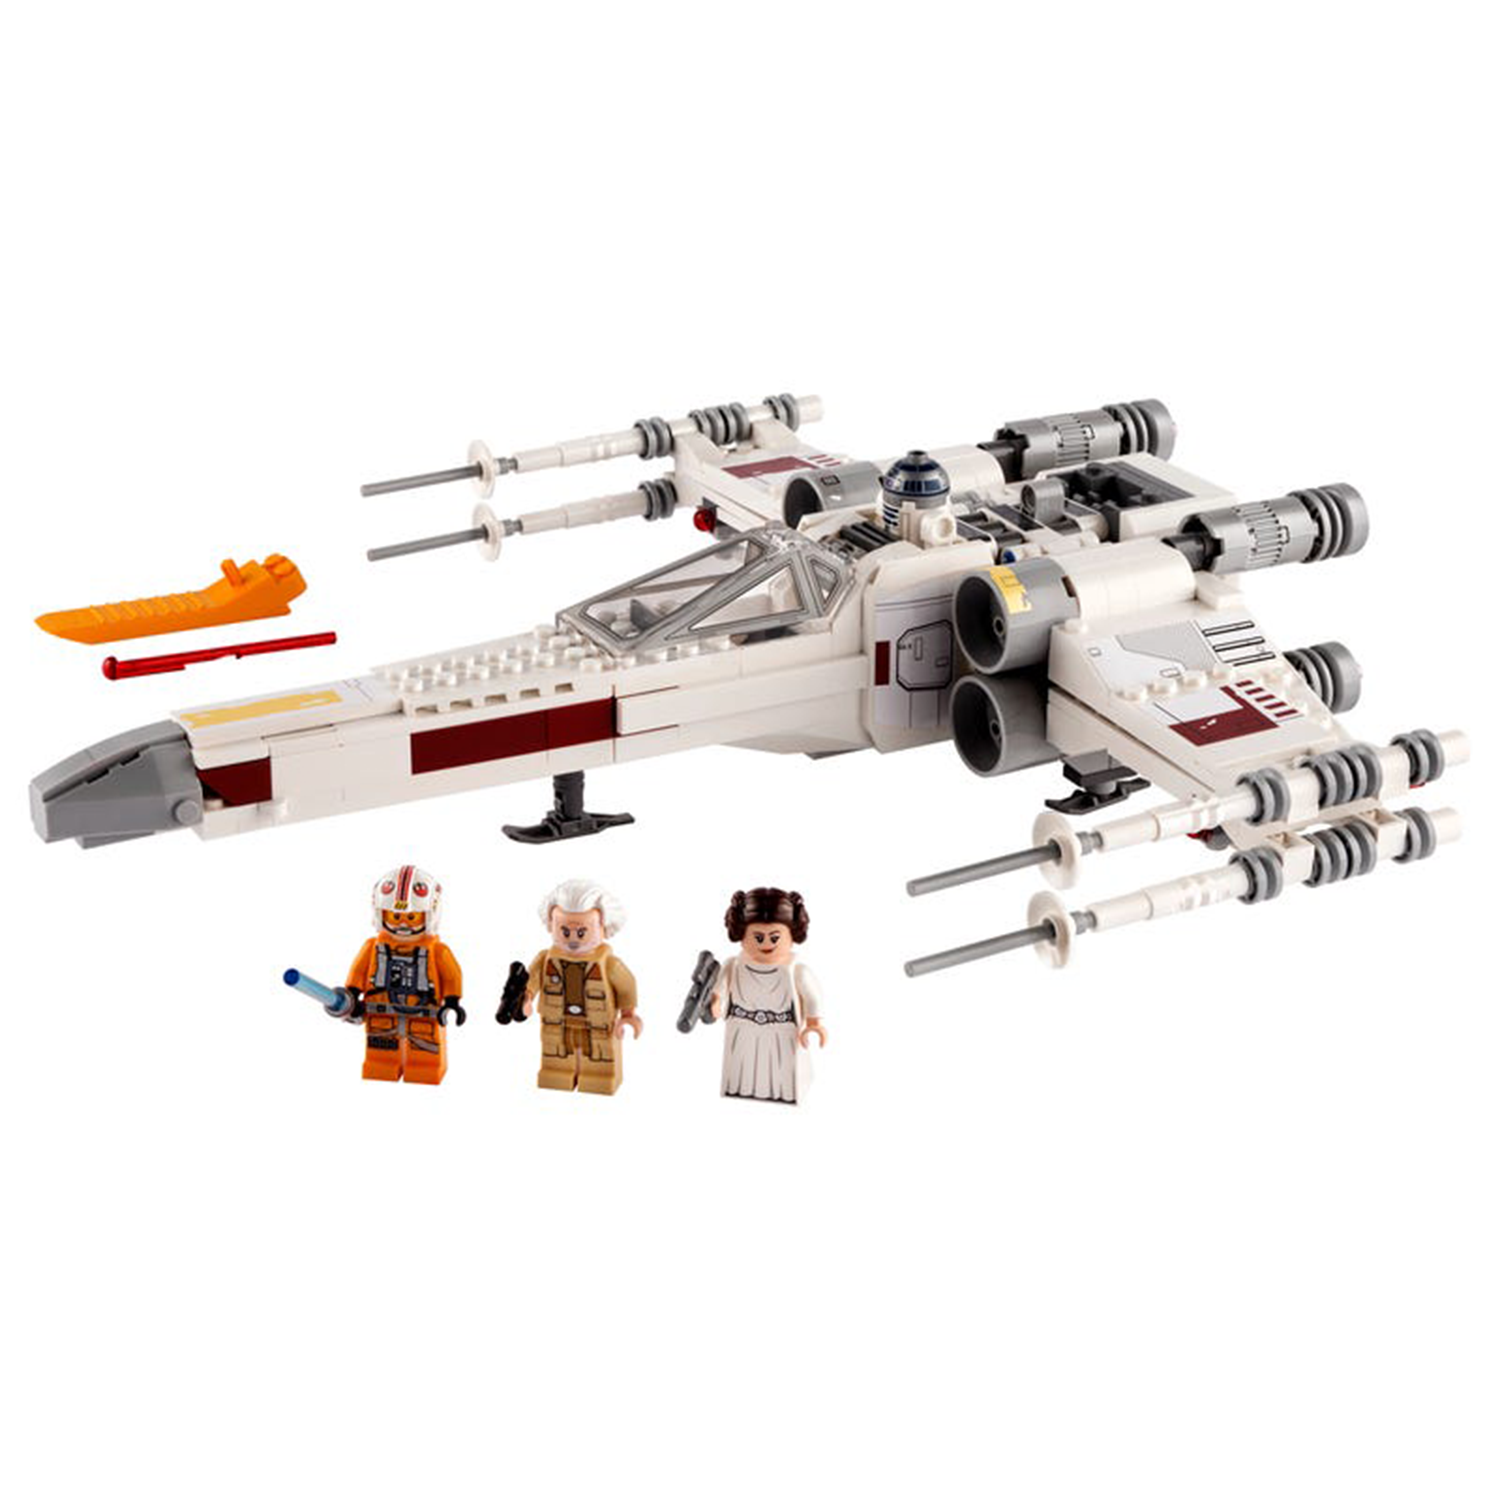 LEGO Star Wars Luke Skywalker's X-Wing Fighter 75301 Building Toy, Gifts for Kids, Boys & Girls with Princess Leia Minifigure and R2-D2 Droid Figure - image 1 of 7